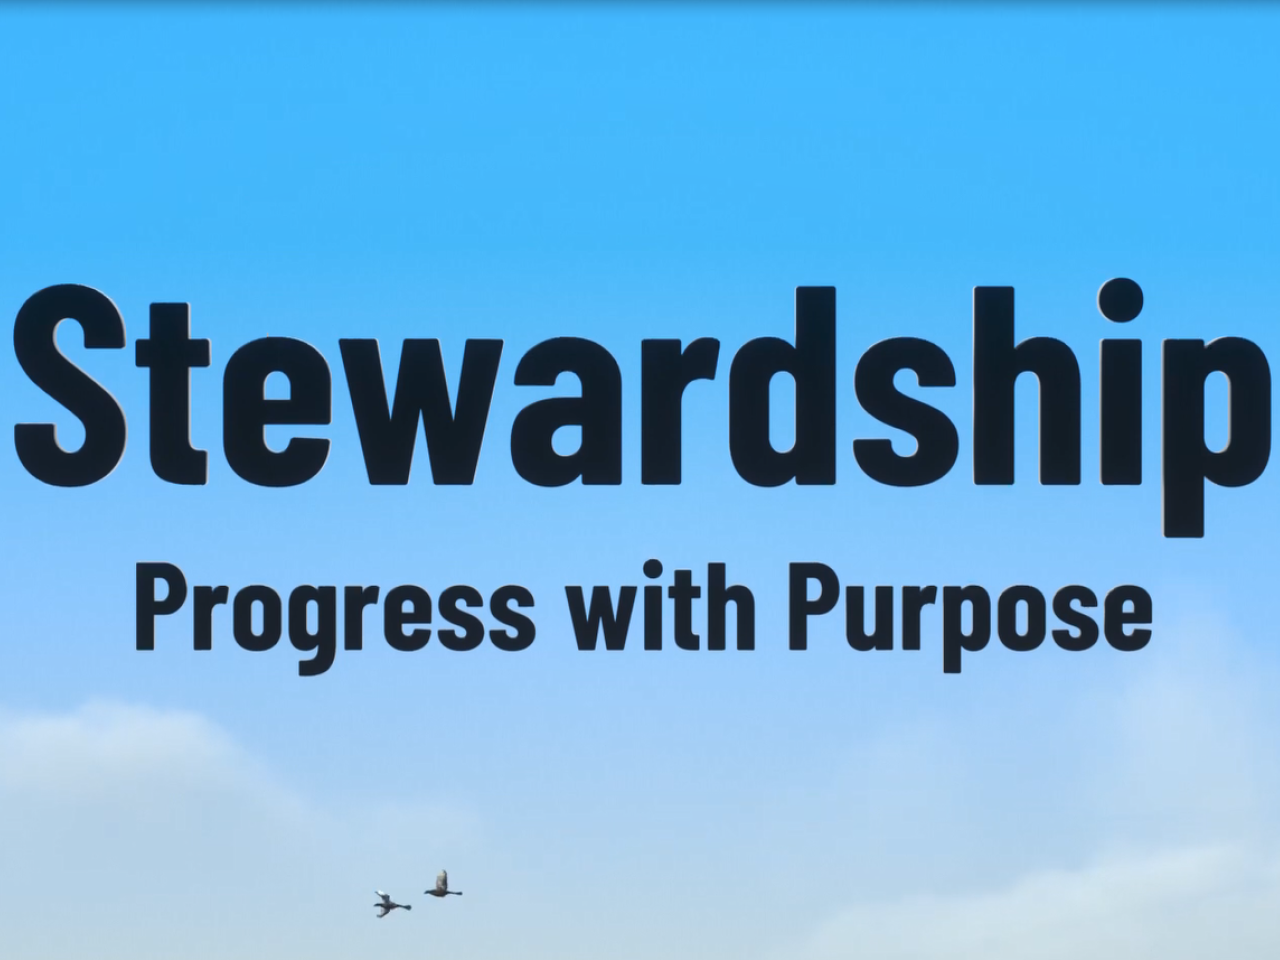 Over a background of a blue sky with two birds in flight: "Stewardship Progress with Purpose."